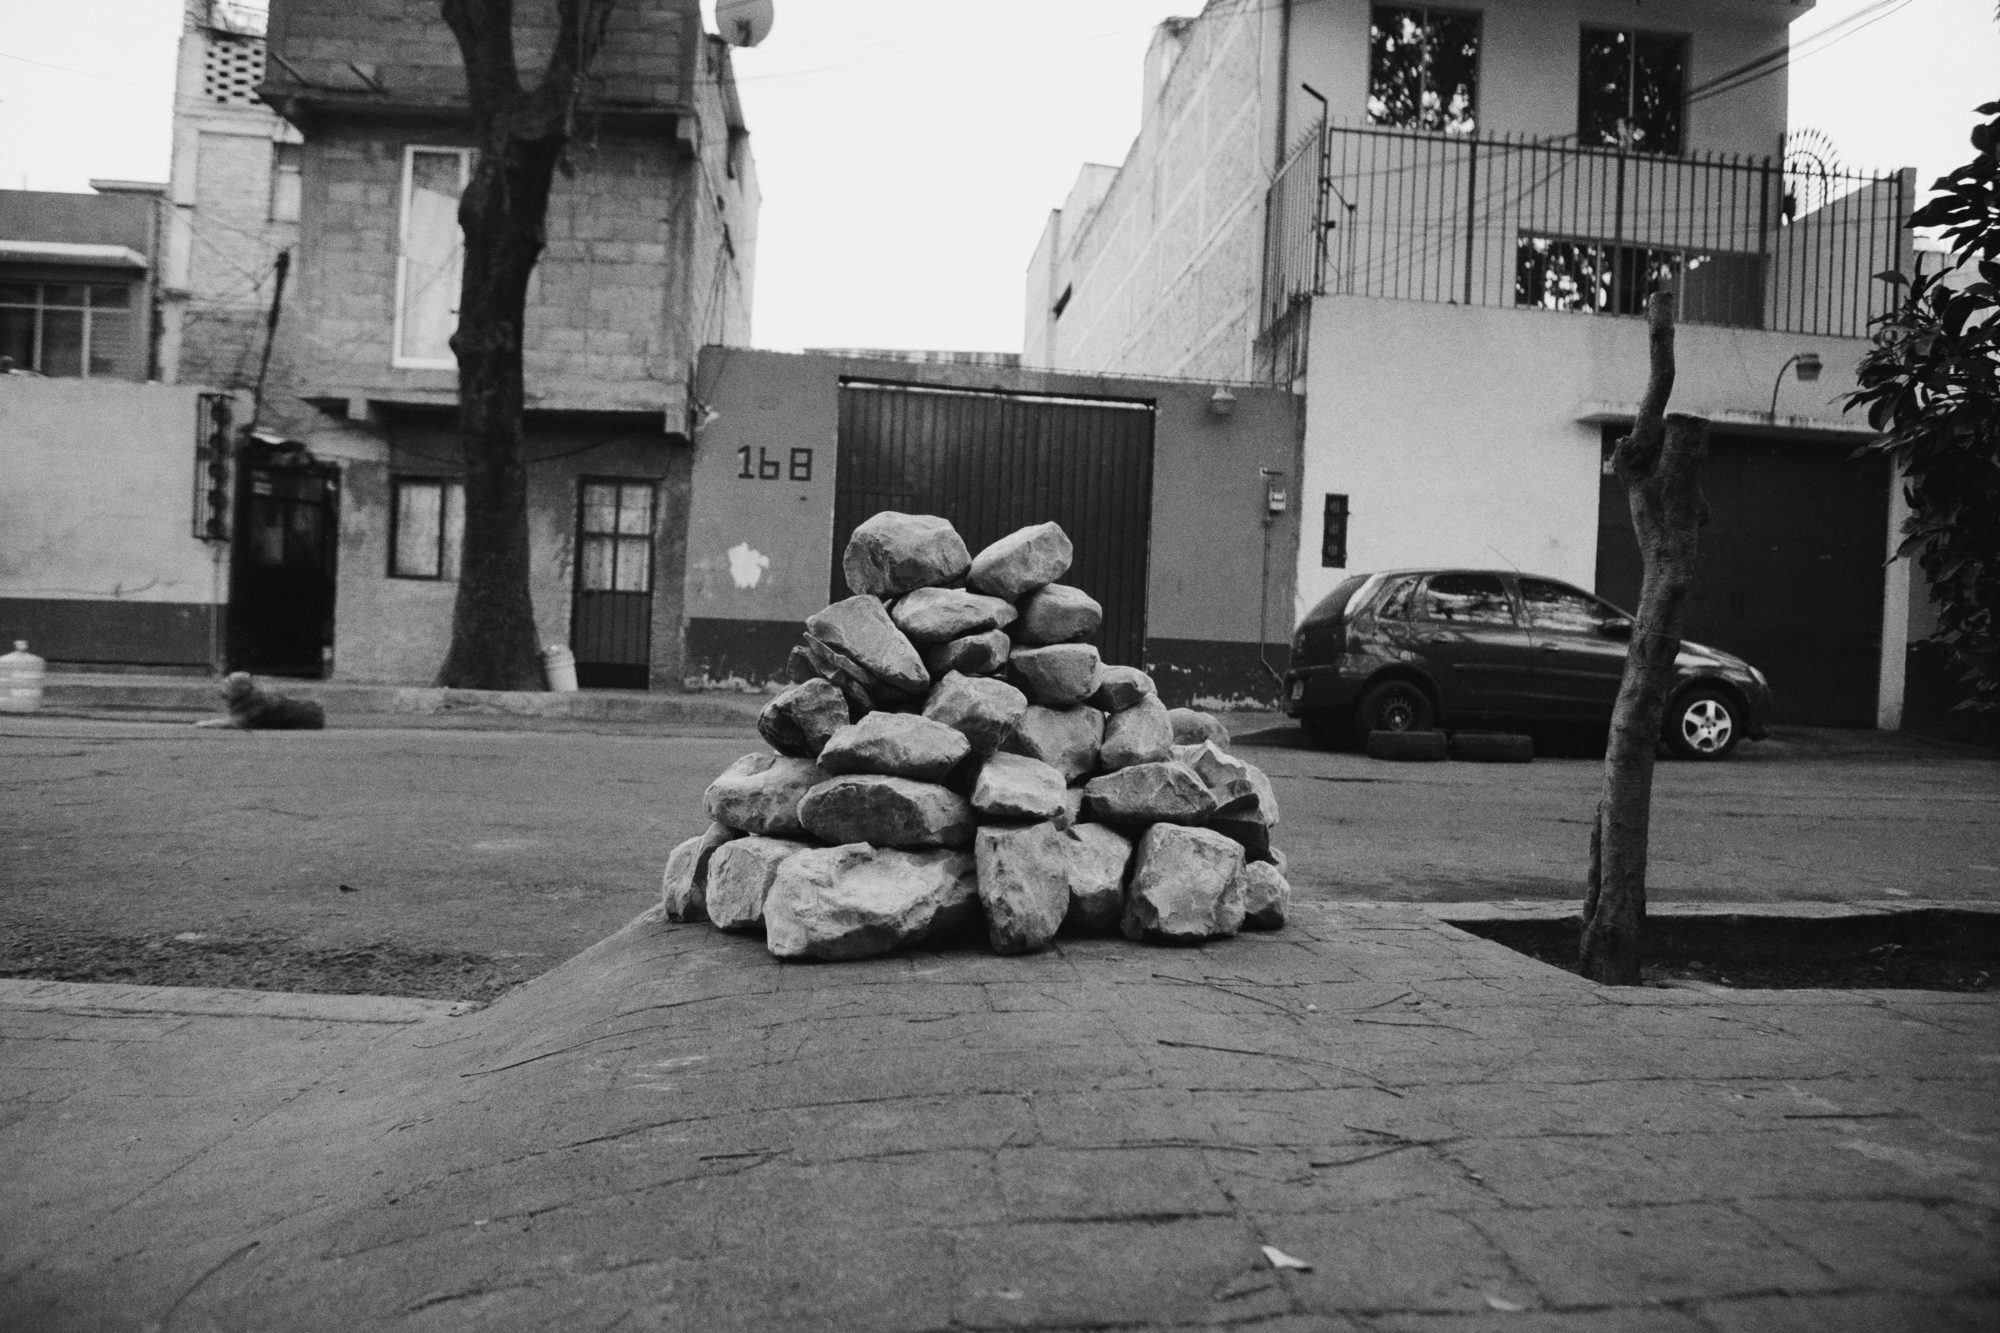 pyramid of rocks on the sidewalk next to the road with a van parked on the curb